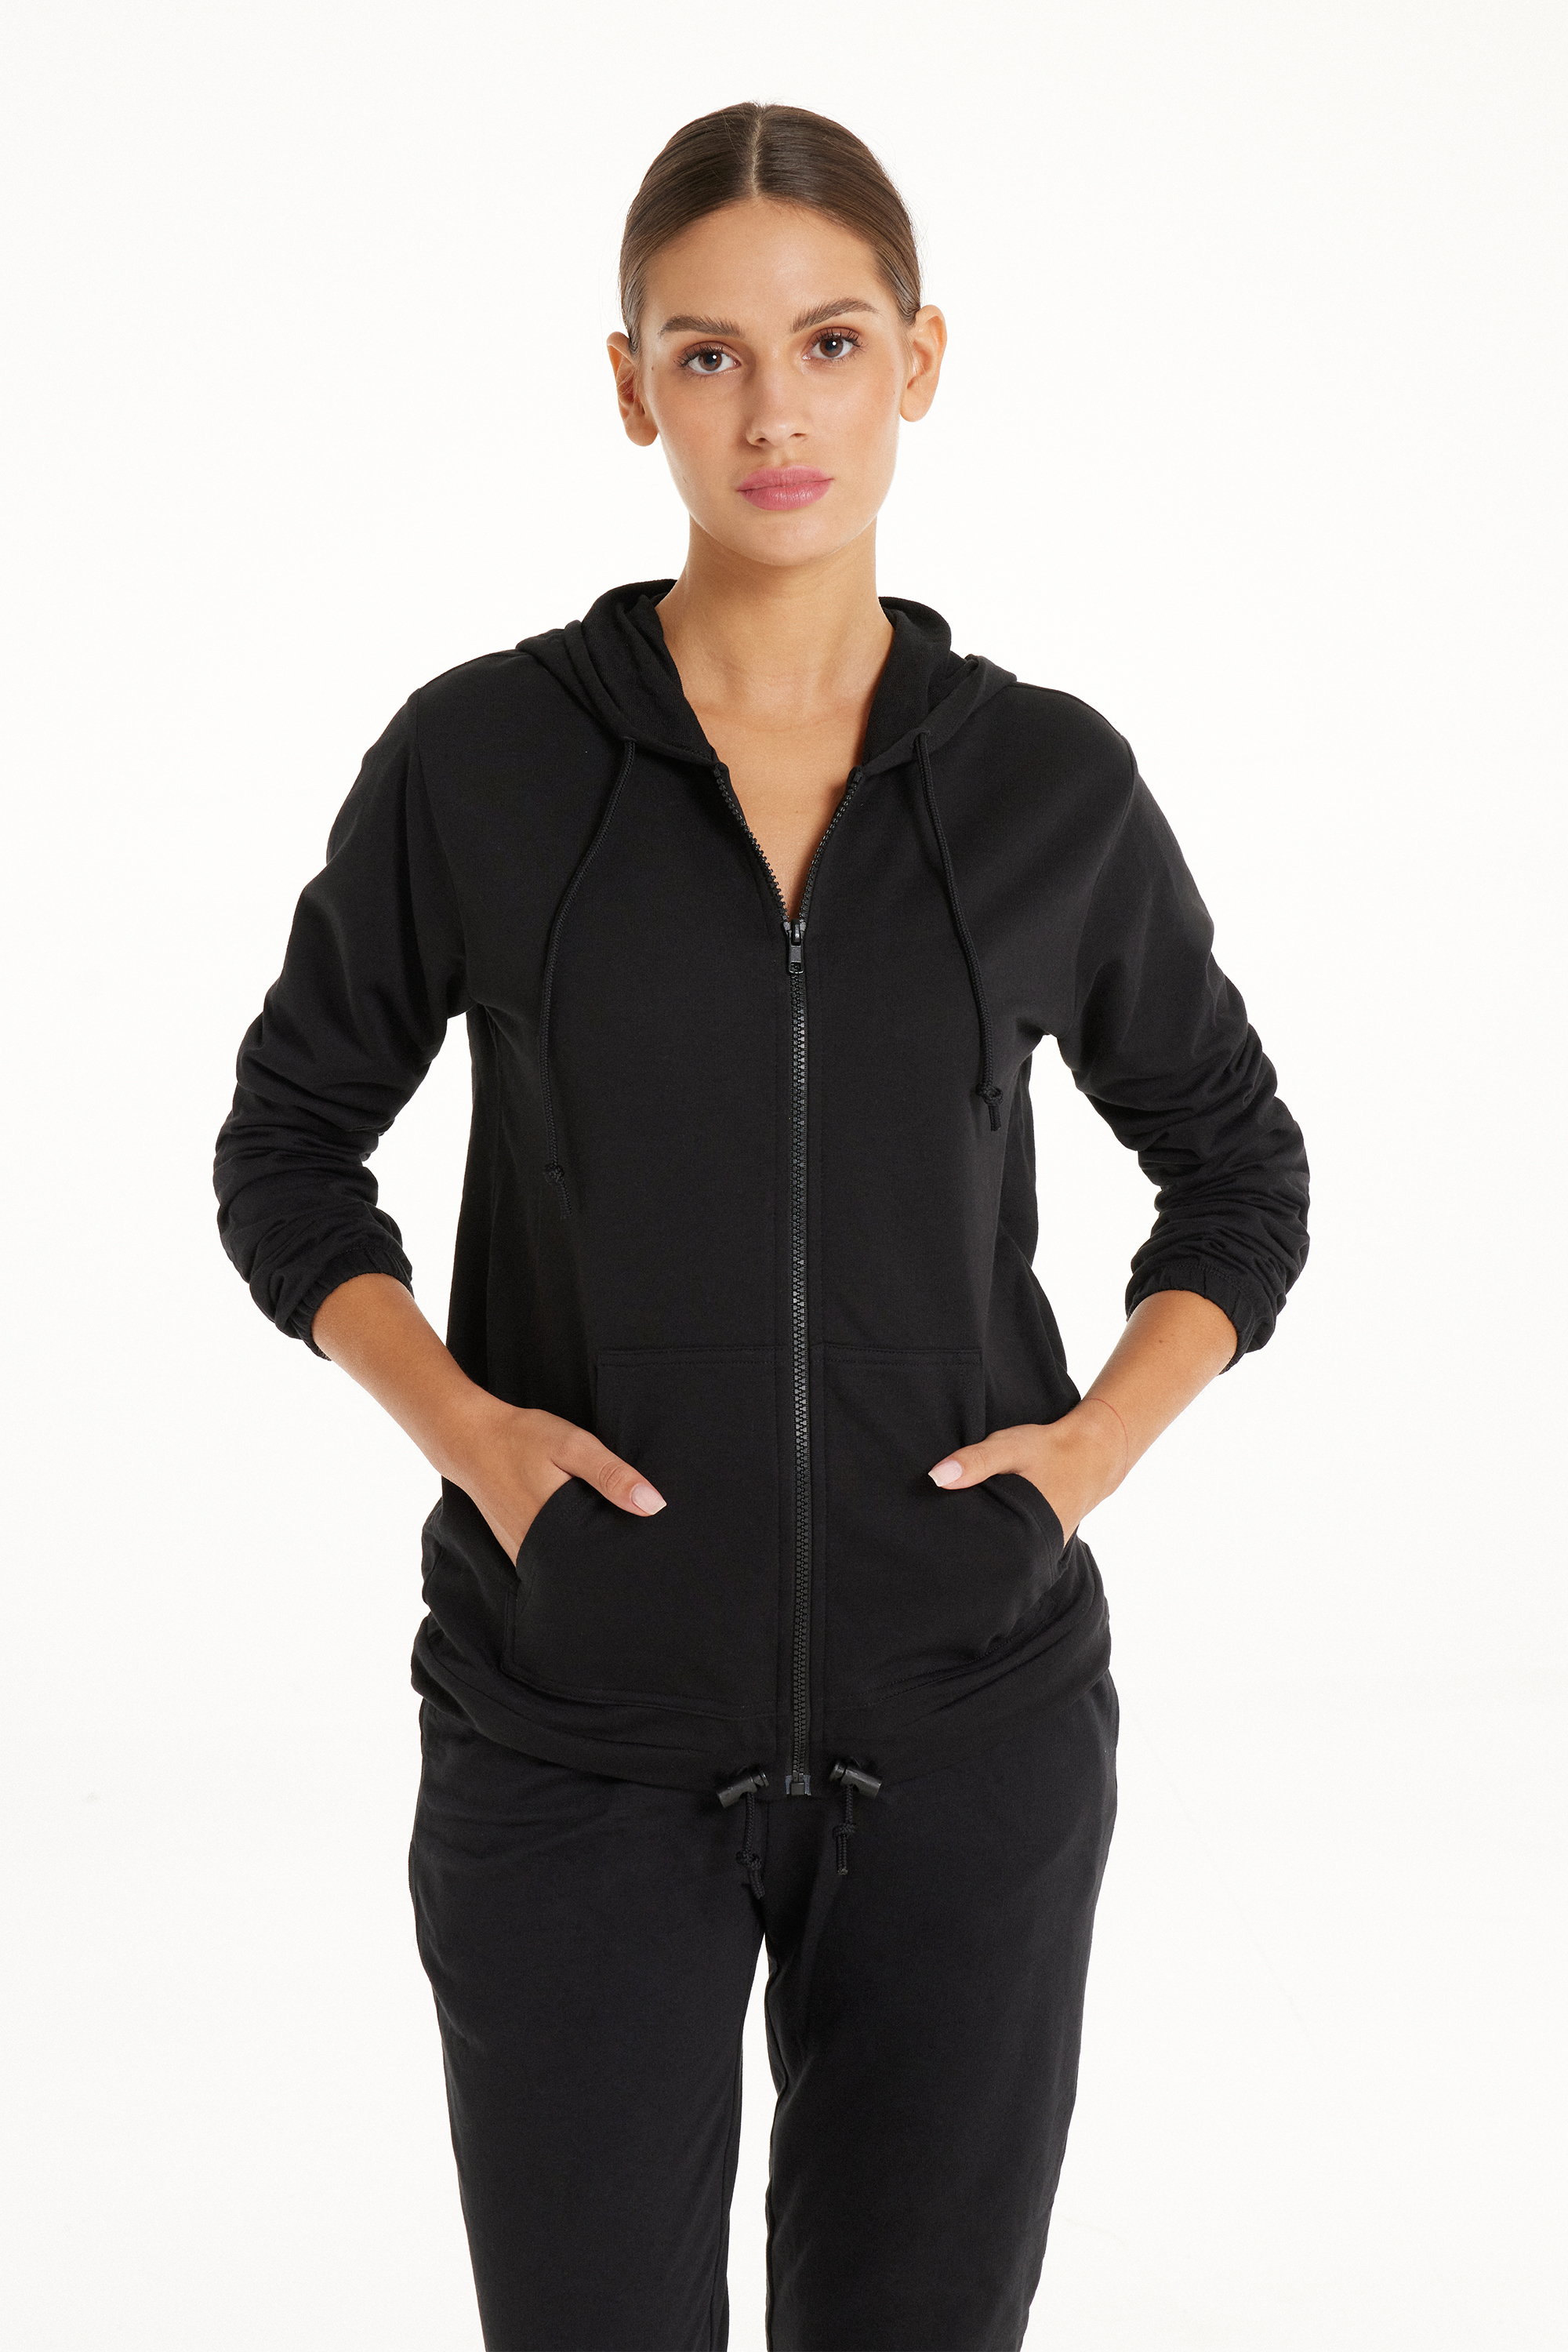 Hooded Sweatshirt with Zip and Drawstring